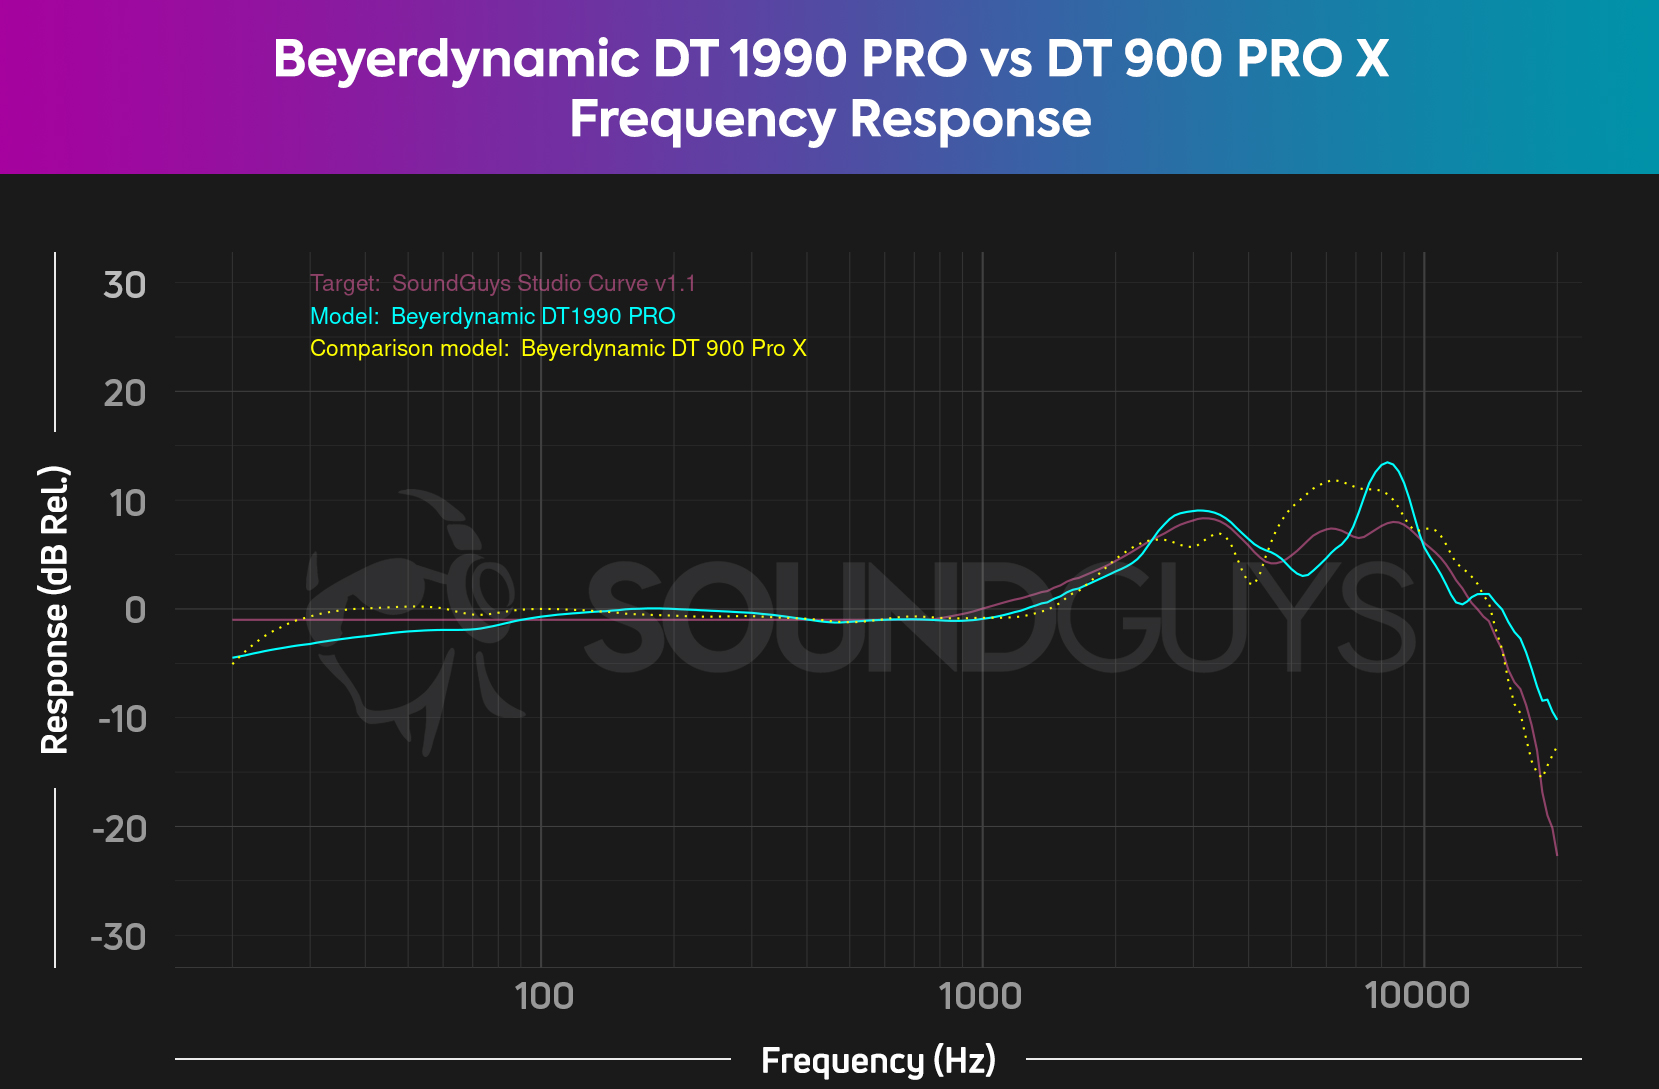 A chart depicts how the Beyerdynamic DT 1990 PRO frequency response compares to that of the DT 990 PRO X, with both headphones sounding very good.